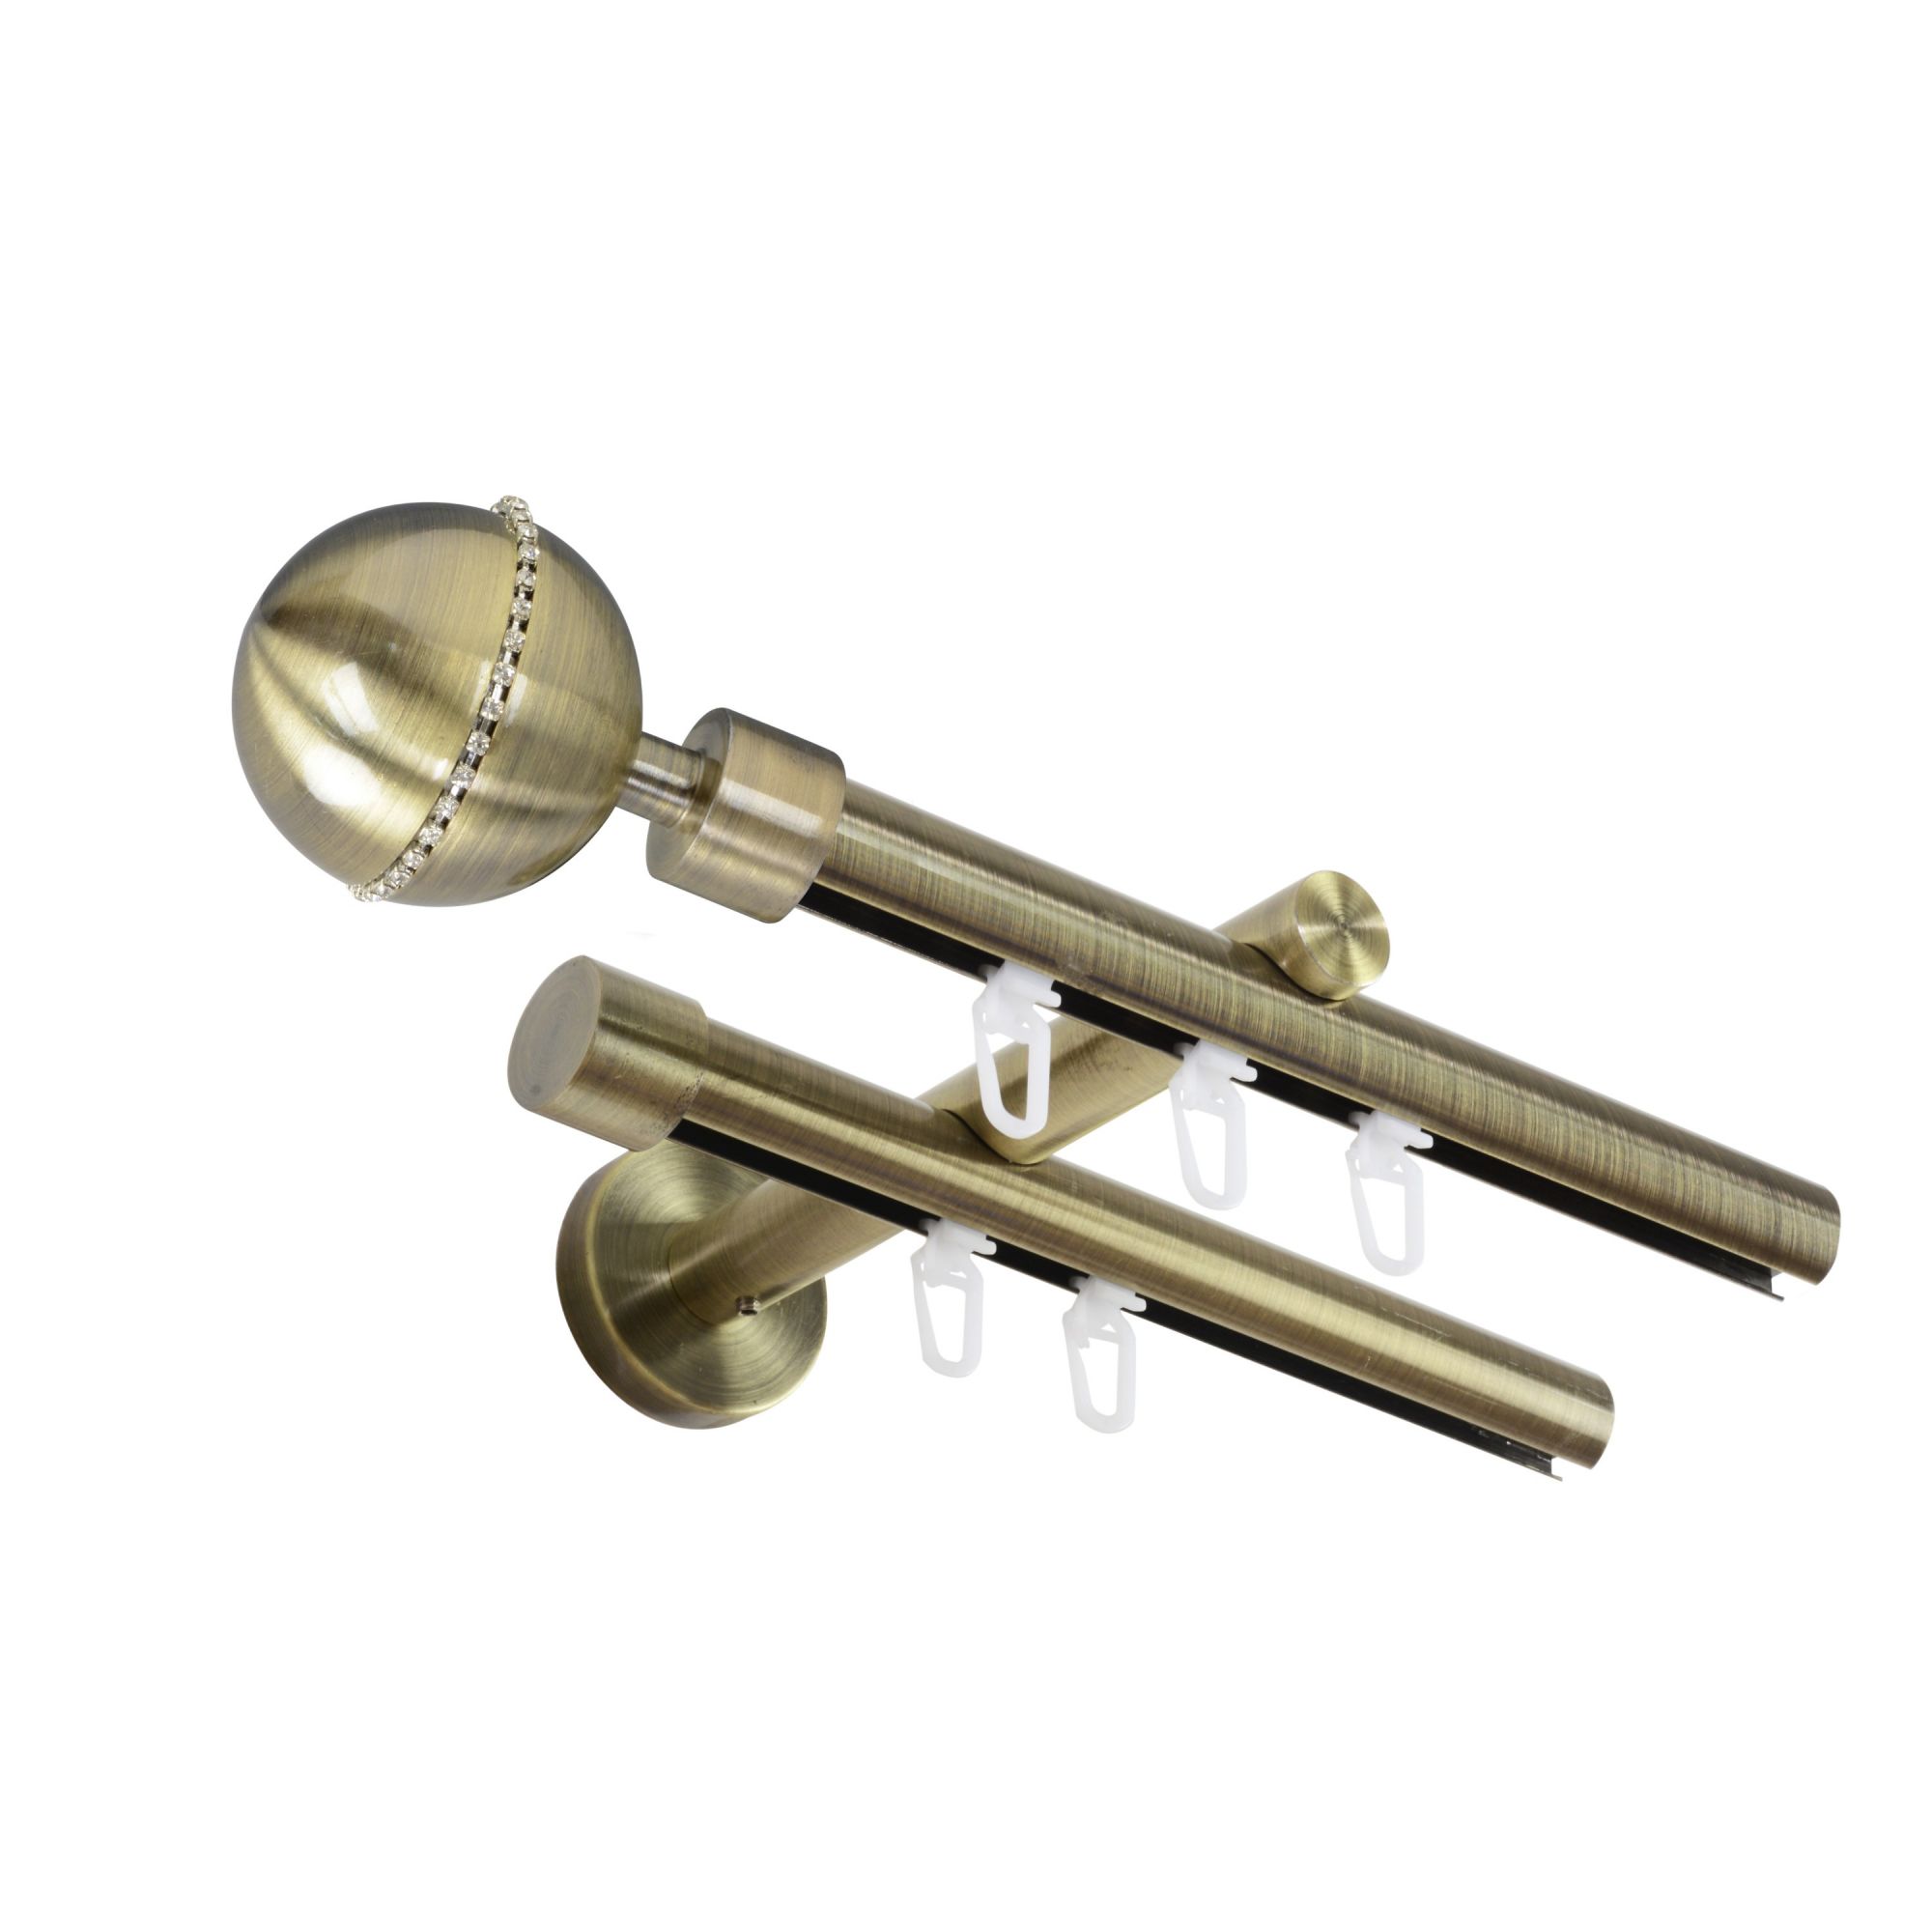 Curtain pole and track